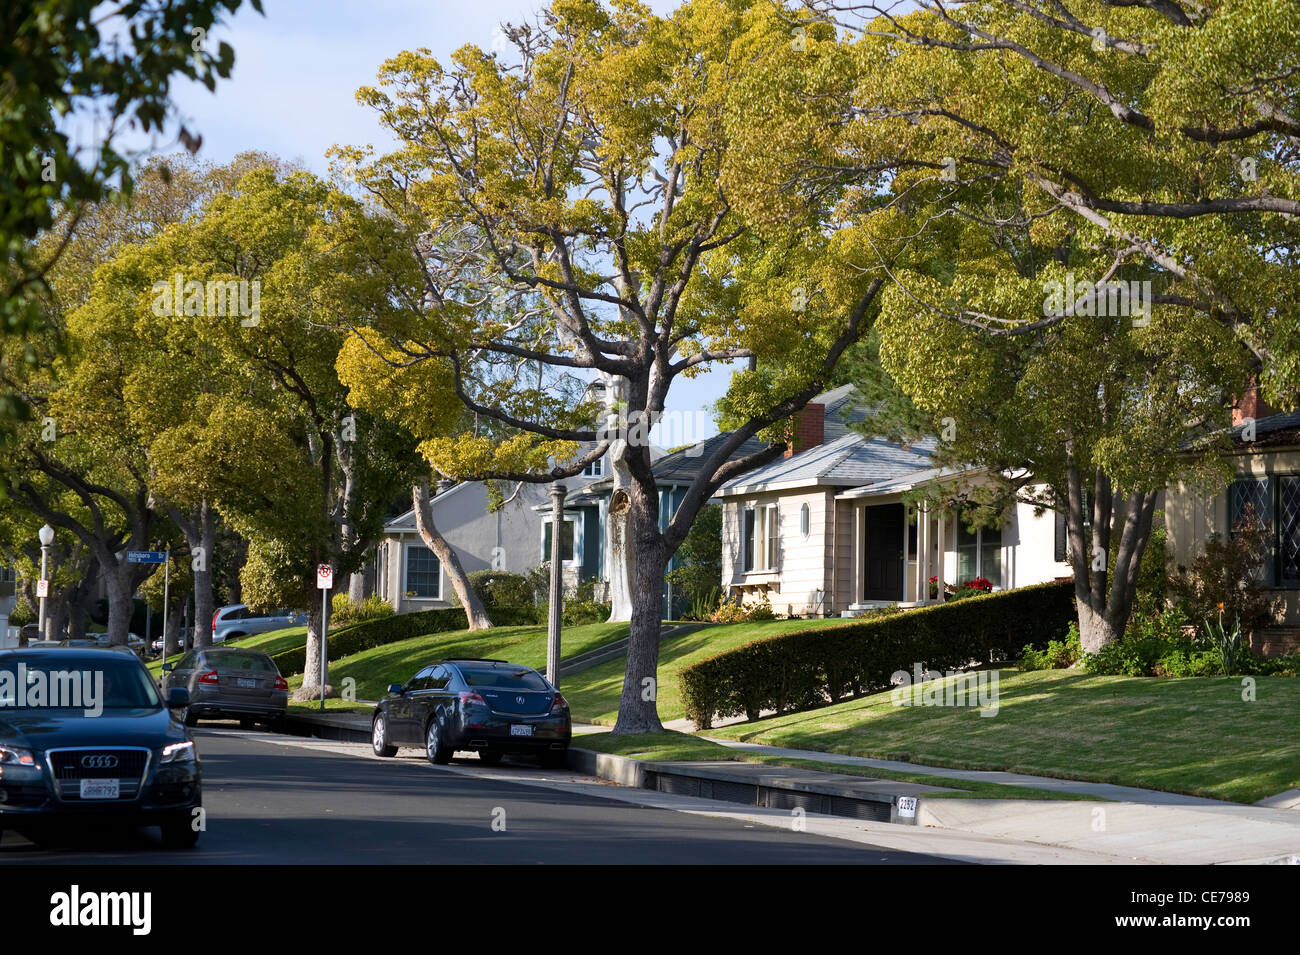 Residential street in Los Angeles, California Stock Photo